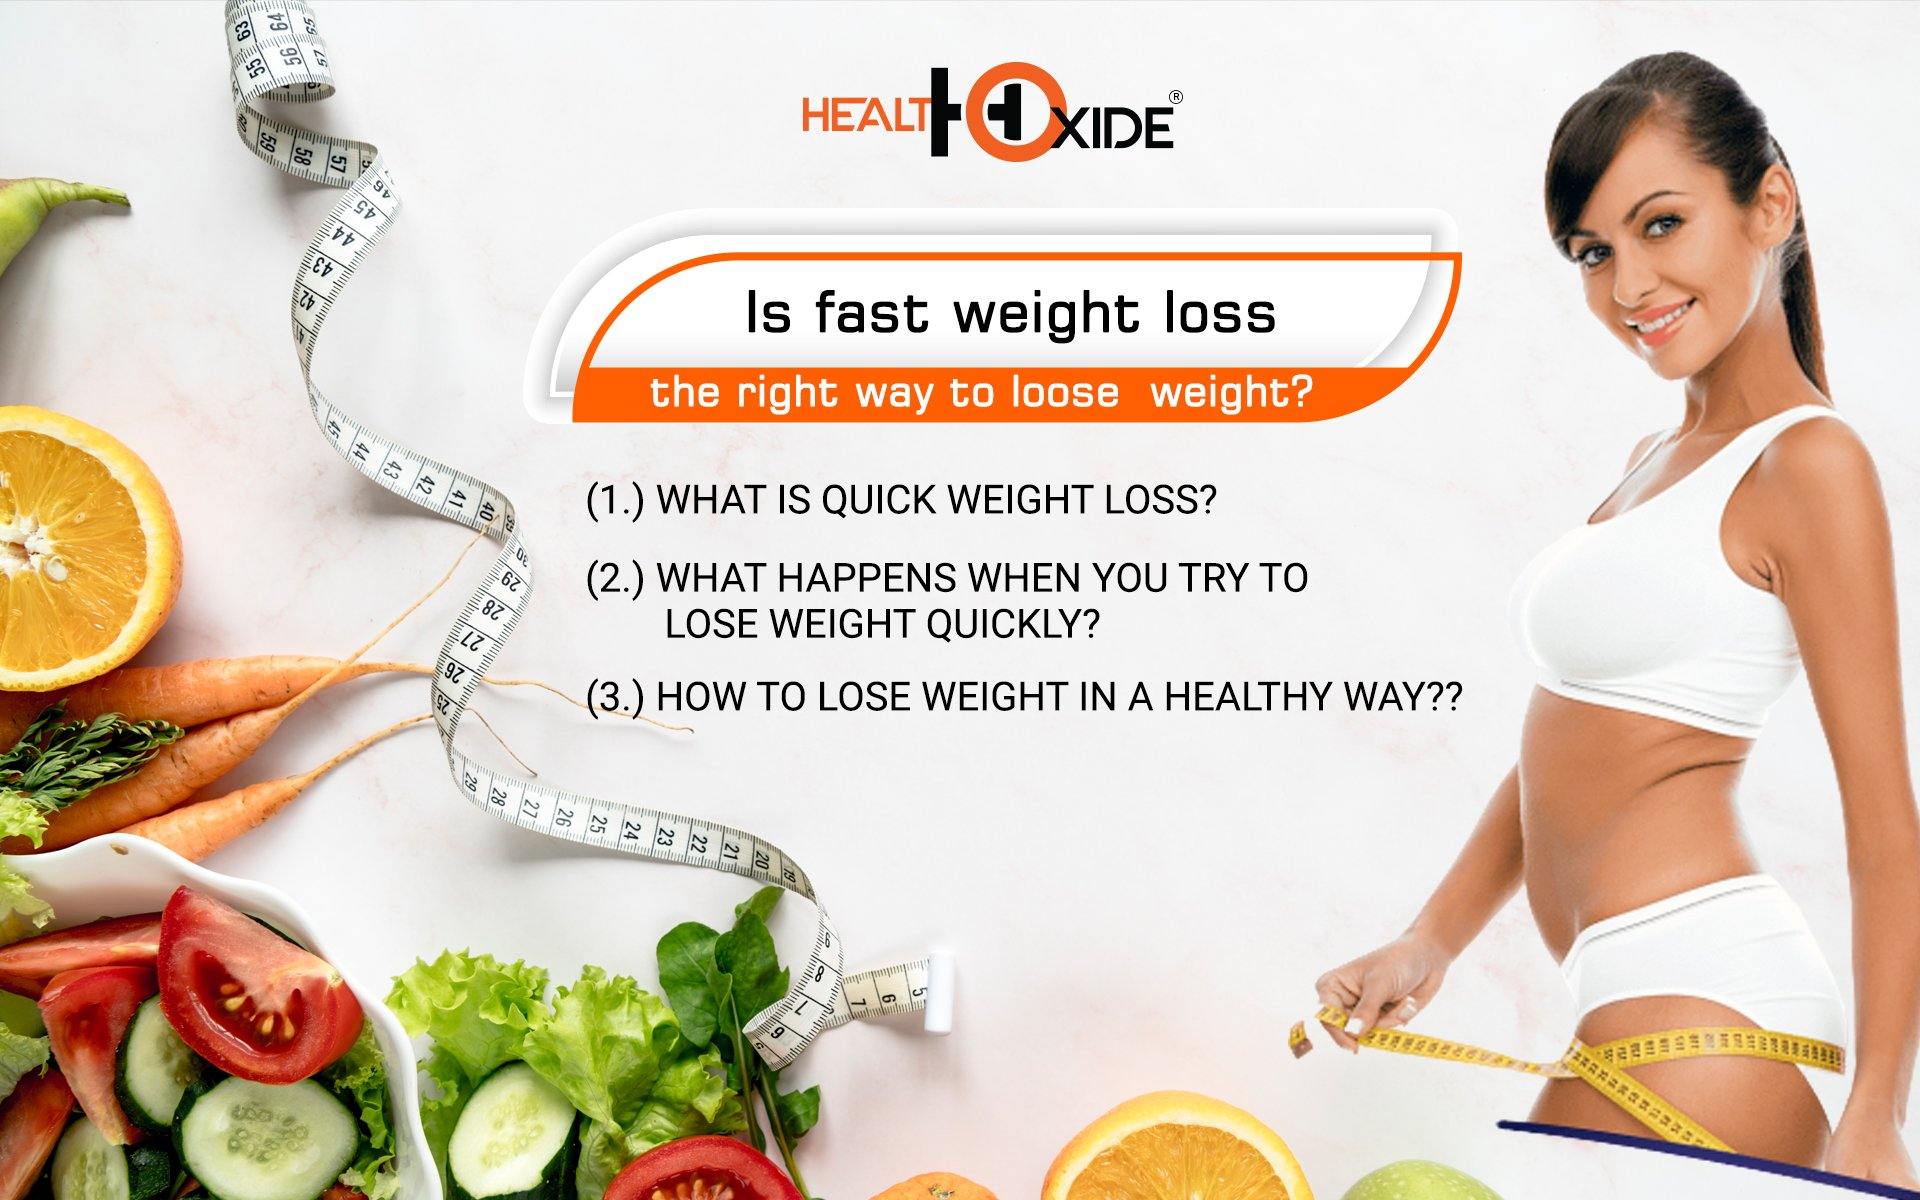 Is fast weight loss the right way to loose weight?